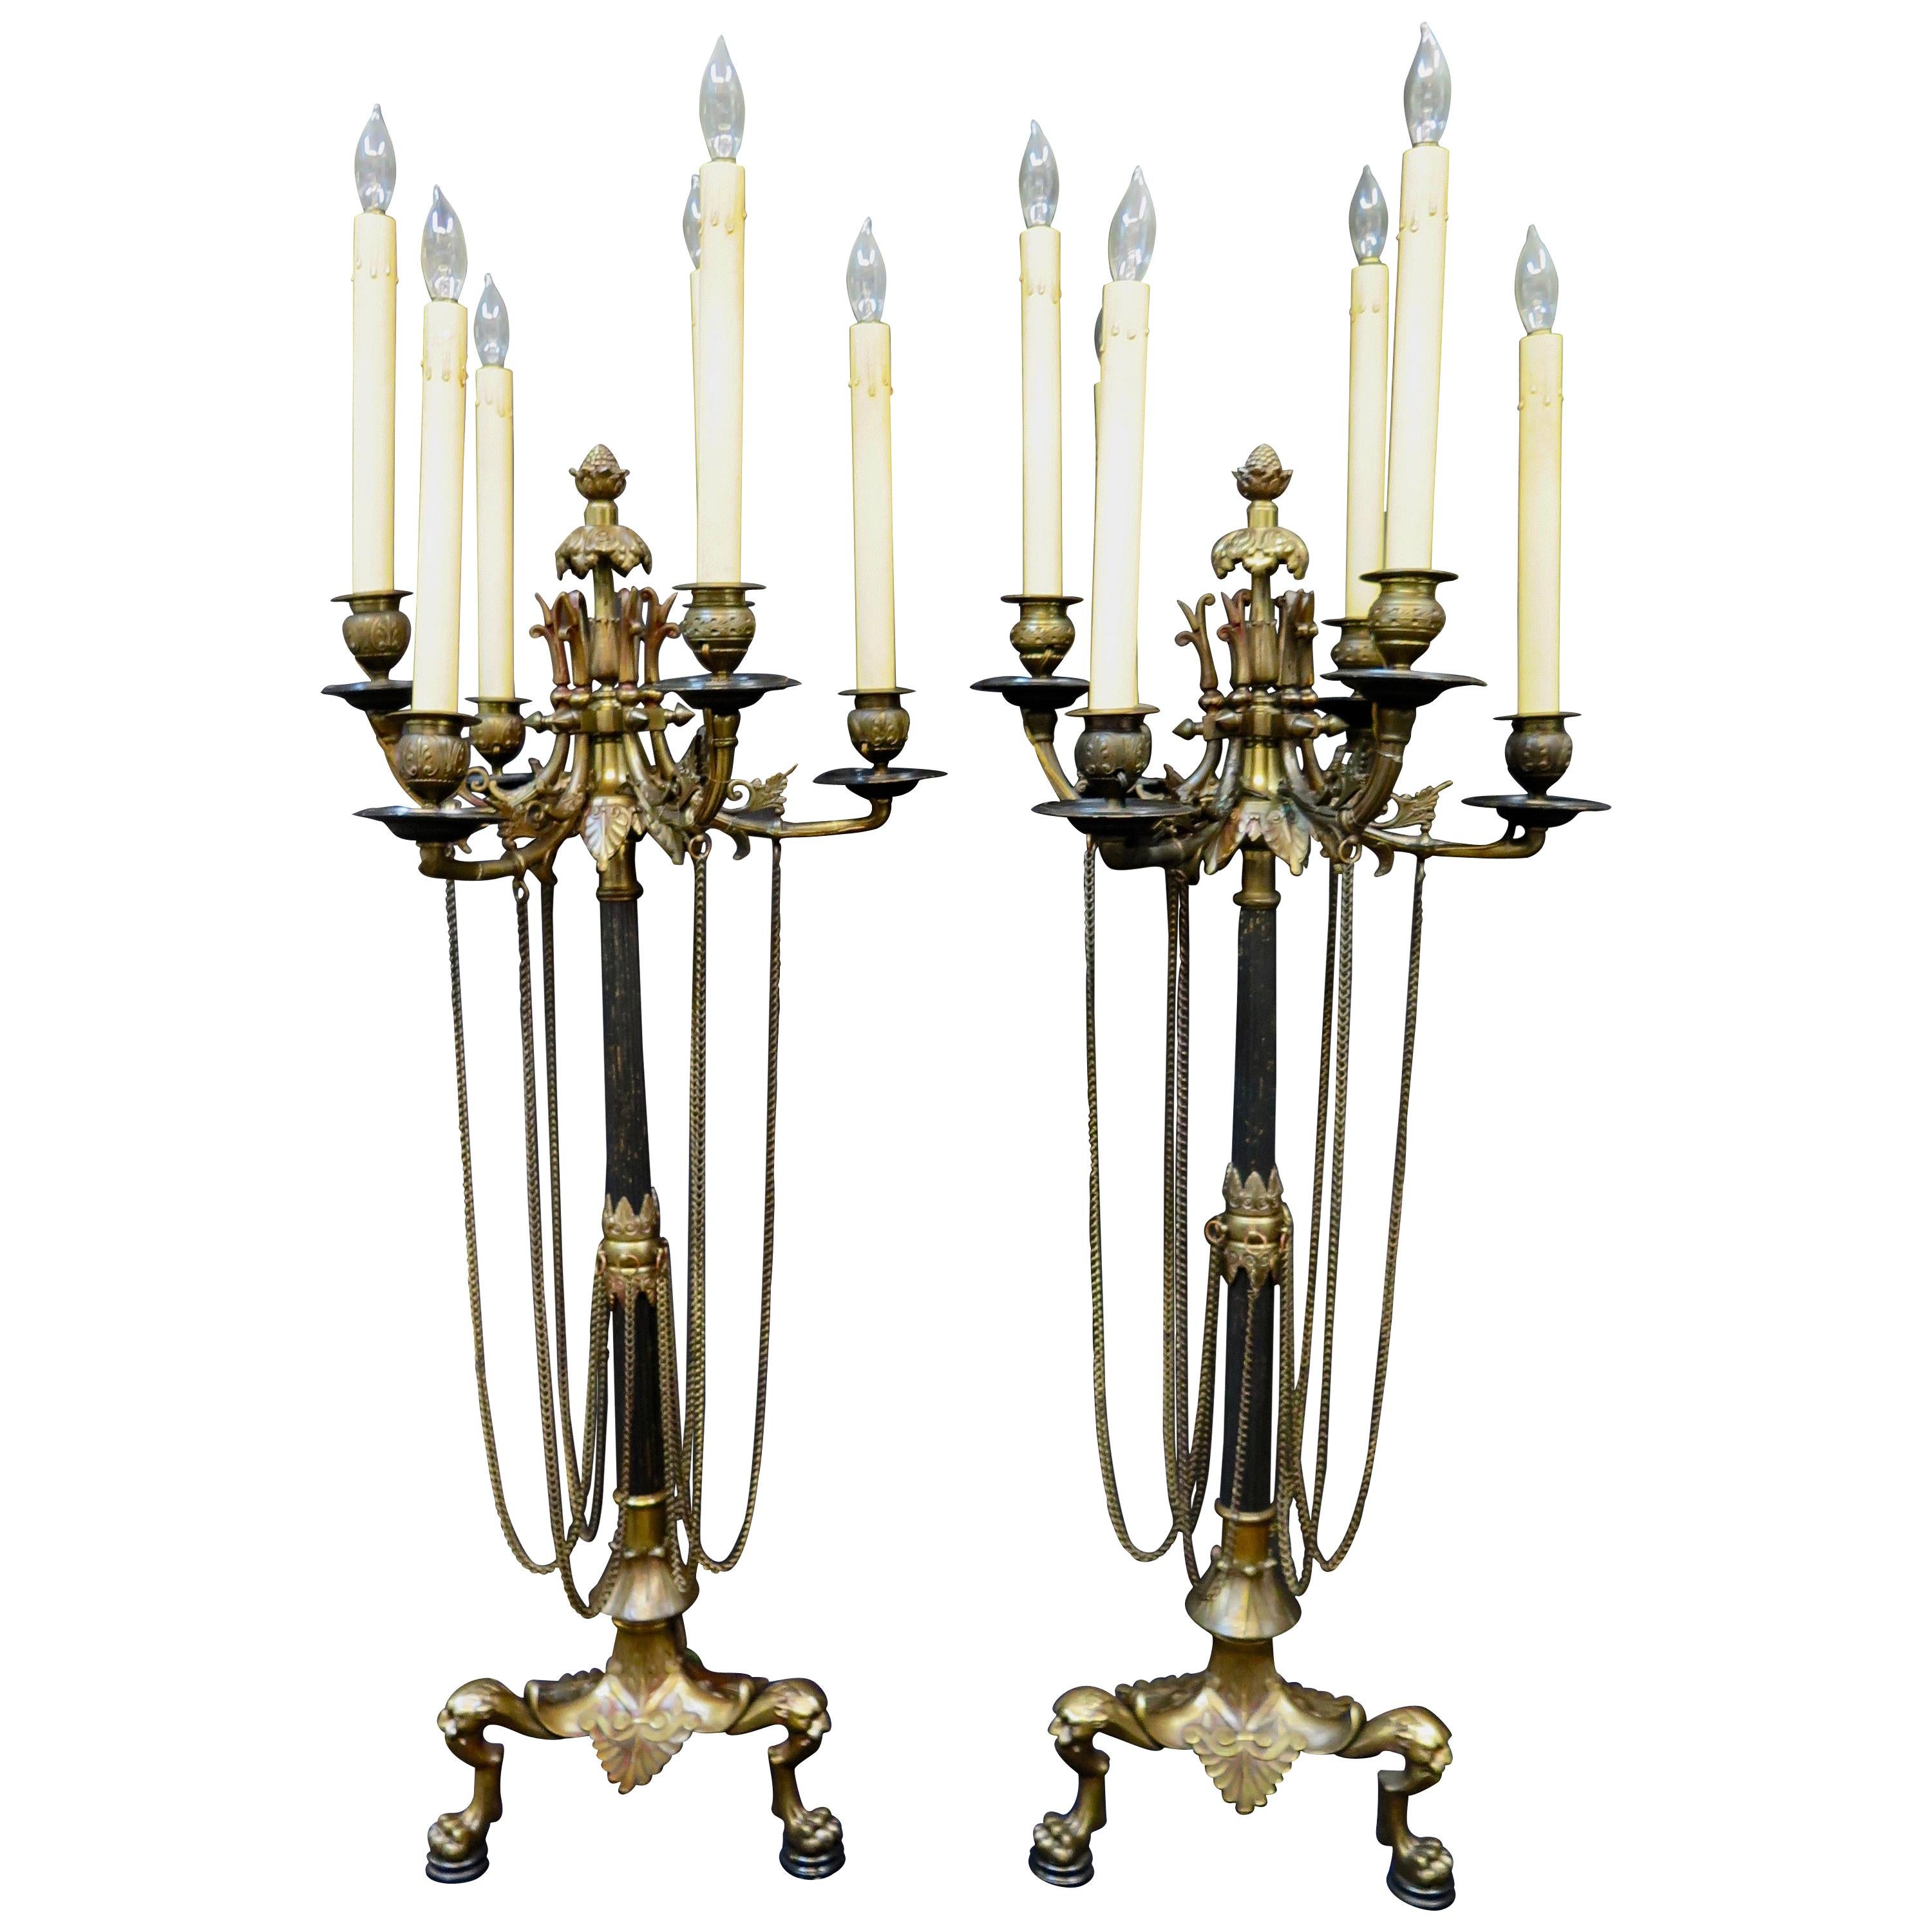 Vintage Early 20th Century Tall Edwardian Candelabra Lampen